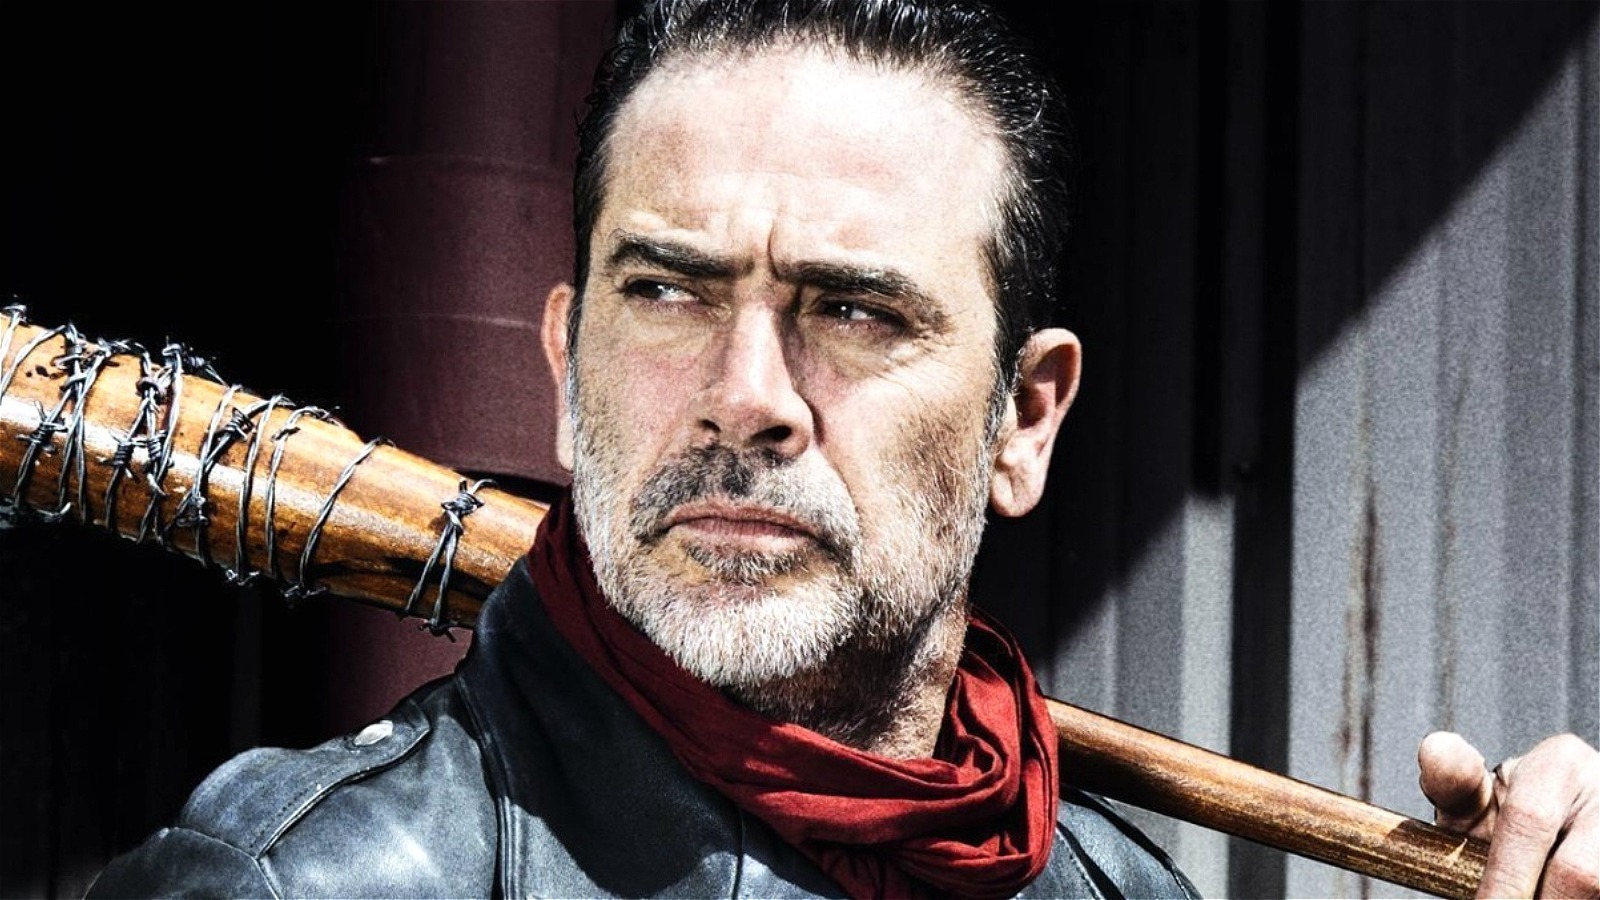 Negan Is the Bad Guy on Walking Dead. But Is He a “Bad” Guy?